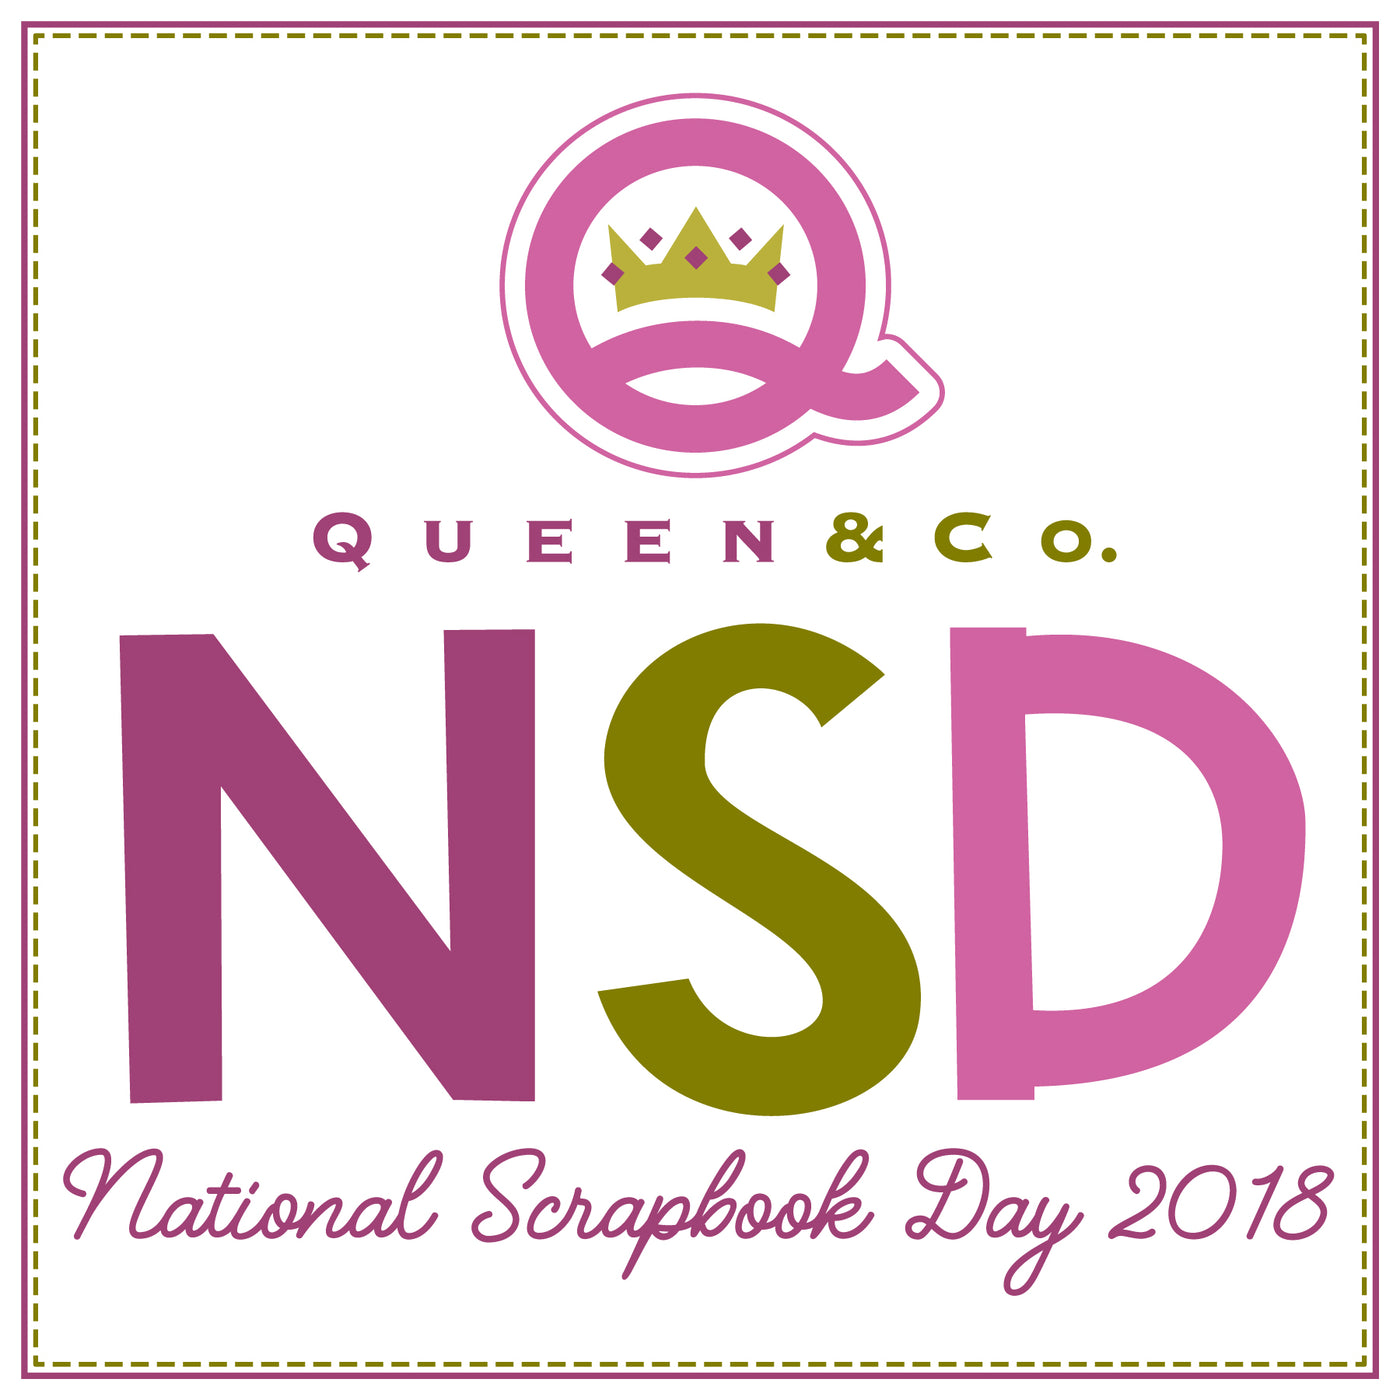 National Scrapbook Day Sale and Giveaways!